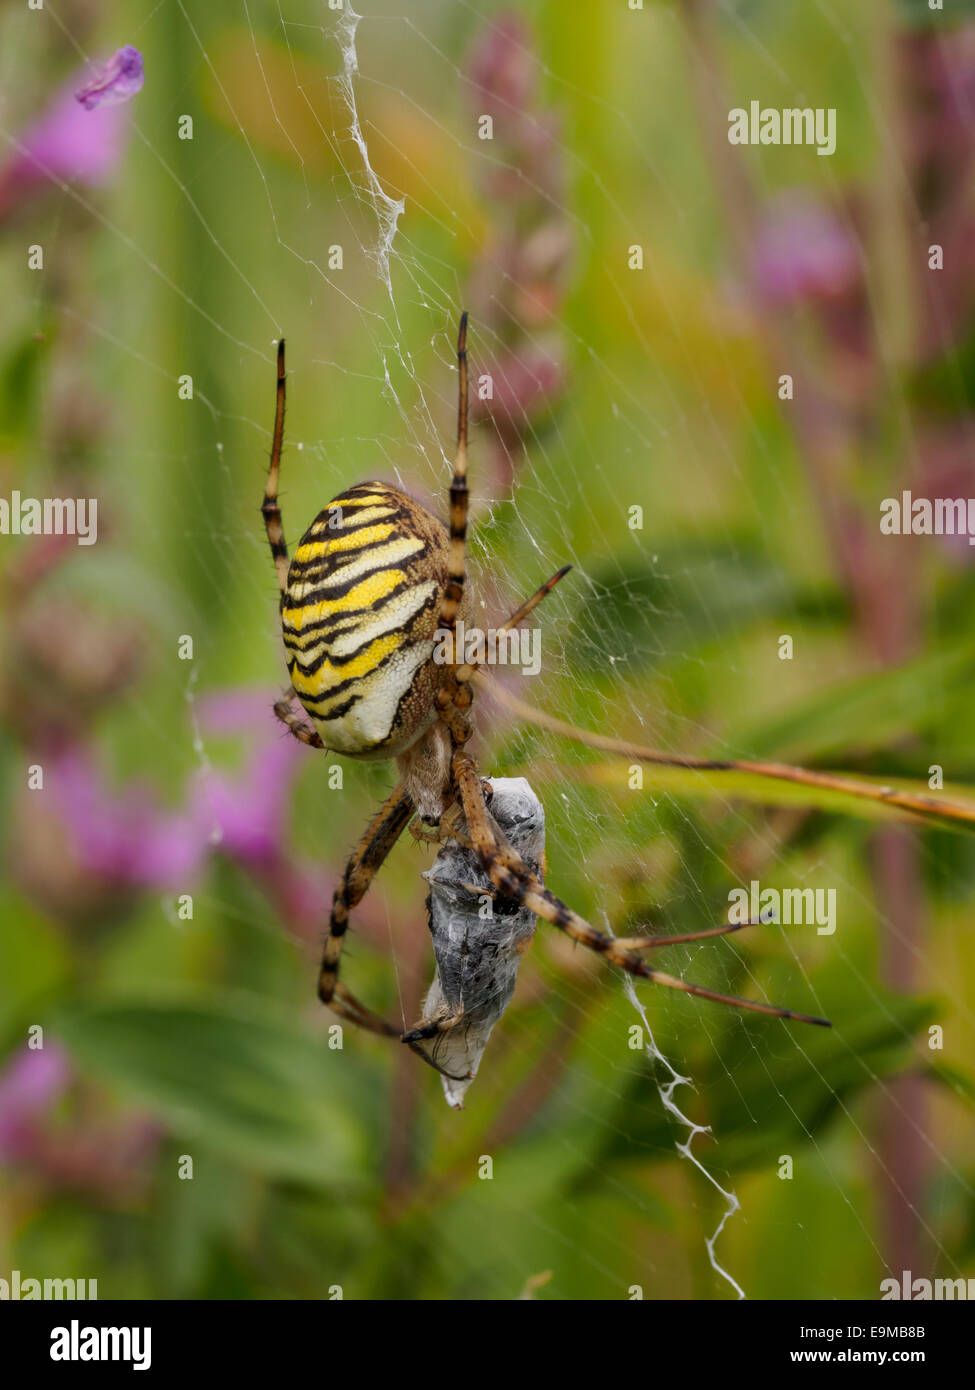 Macro shot of a large striped spider with captured prey Stock Photo